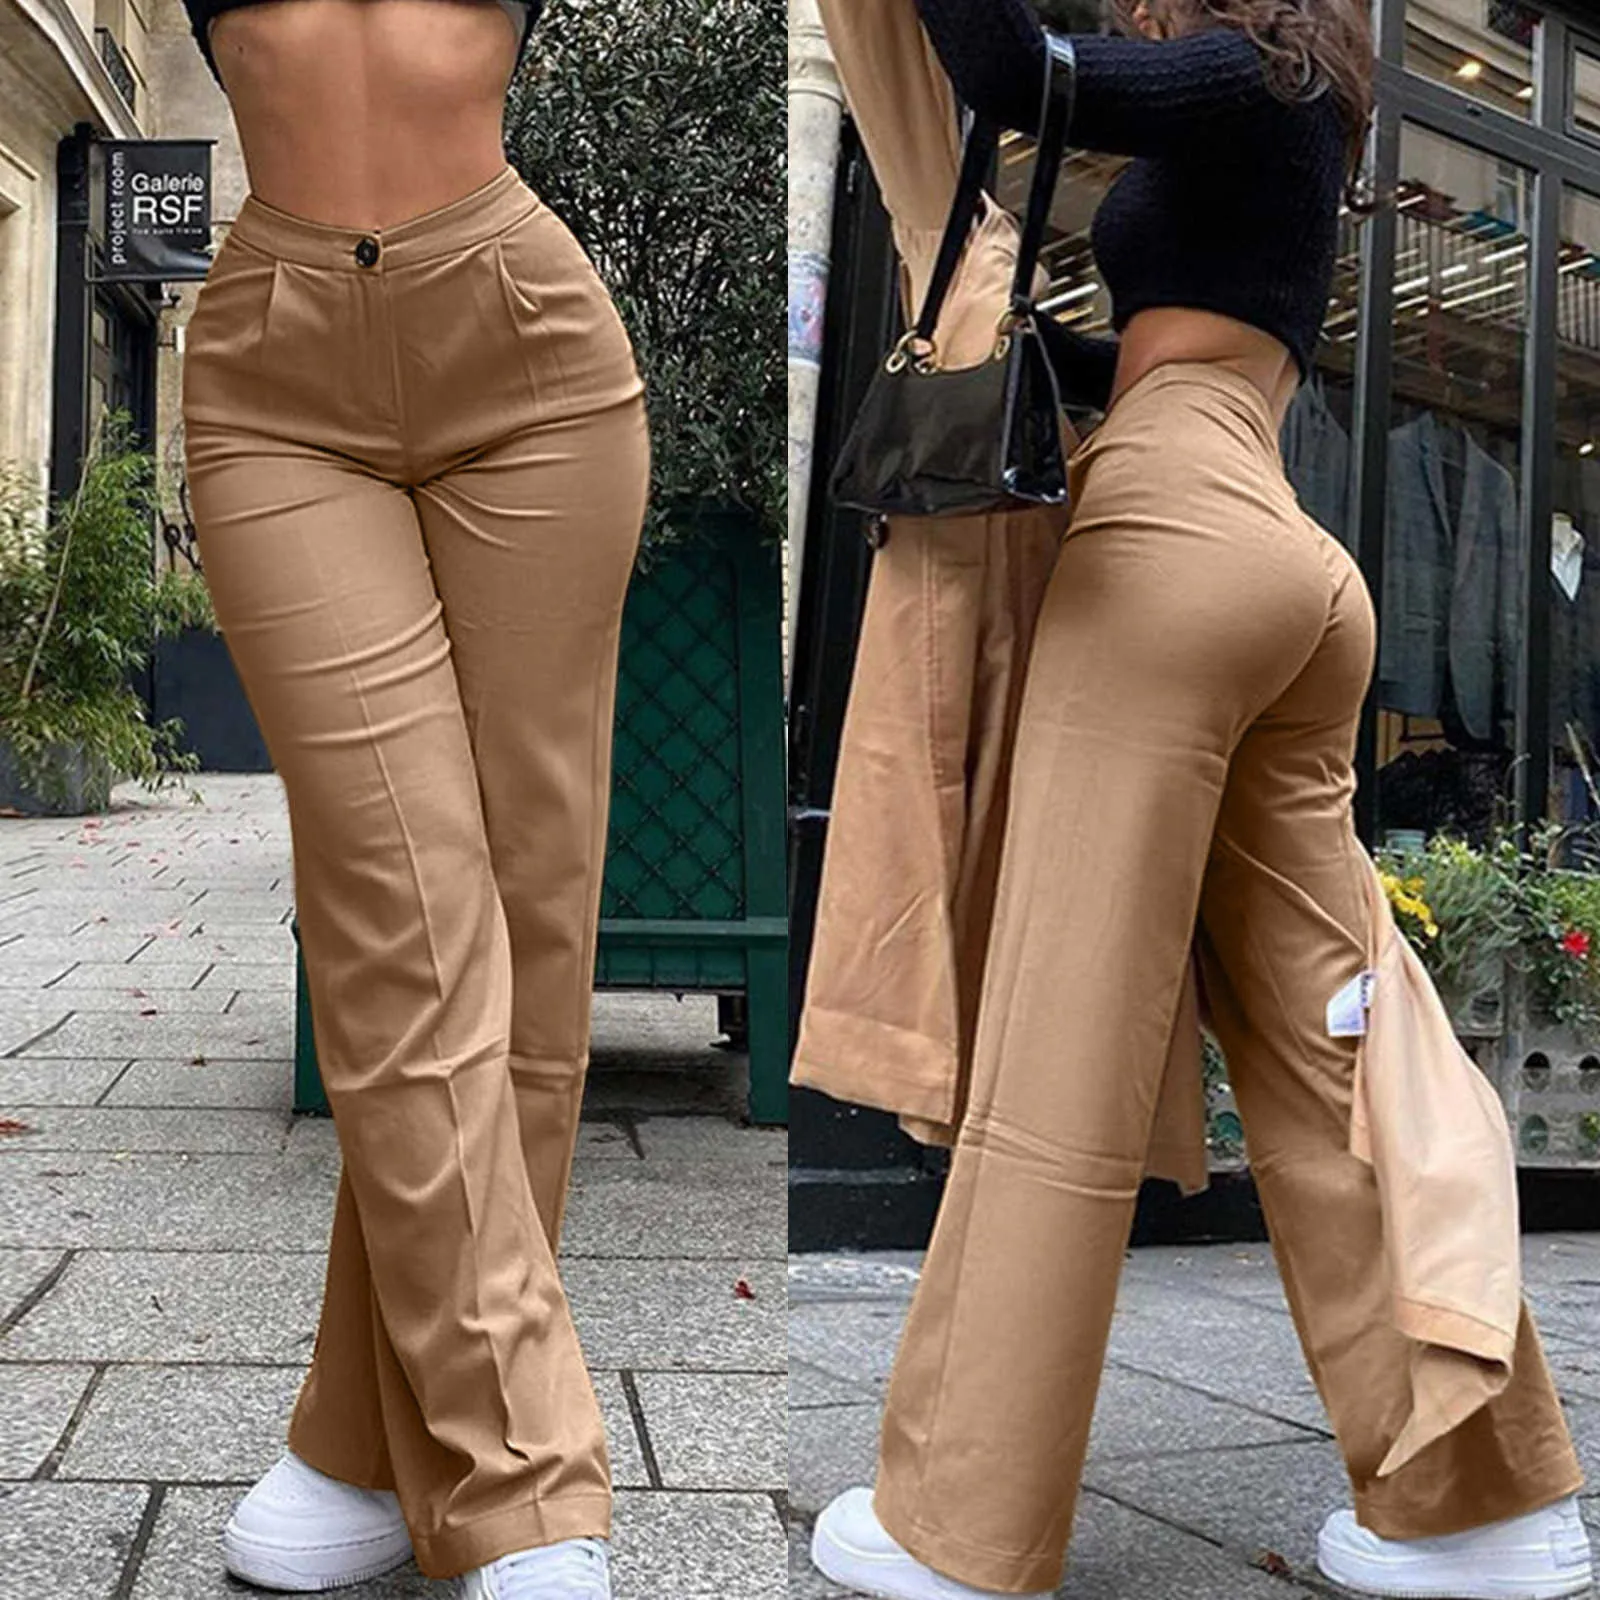 2021 Women's Fit Straight Leg Suit Pant Solid Color Office Business Casual Work Pants Elegant Simple Daily High Quality Pants Q0801